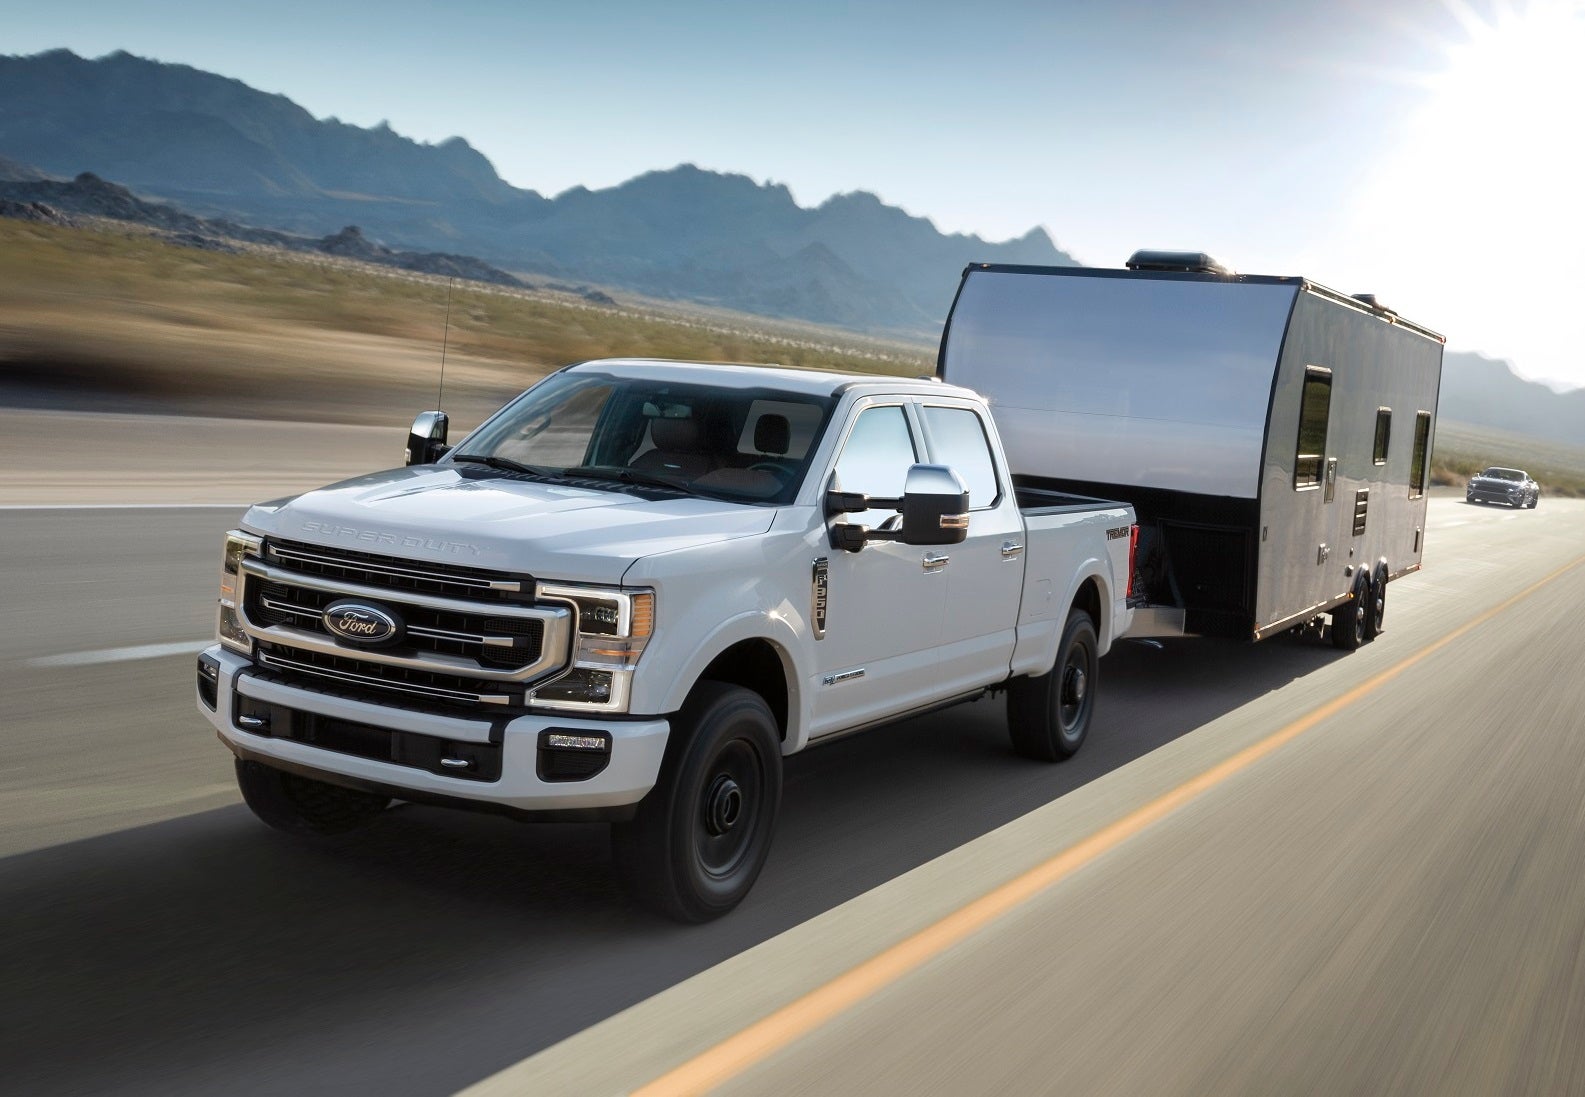 2022 Ford F-350 Review | Five Star Ford Dallas, TX